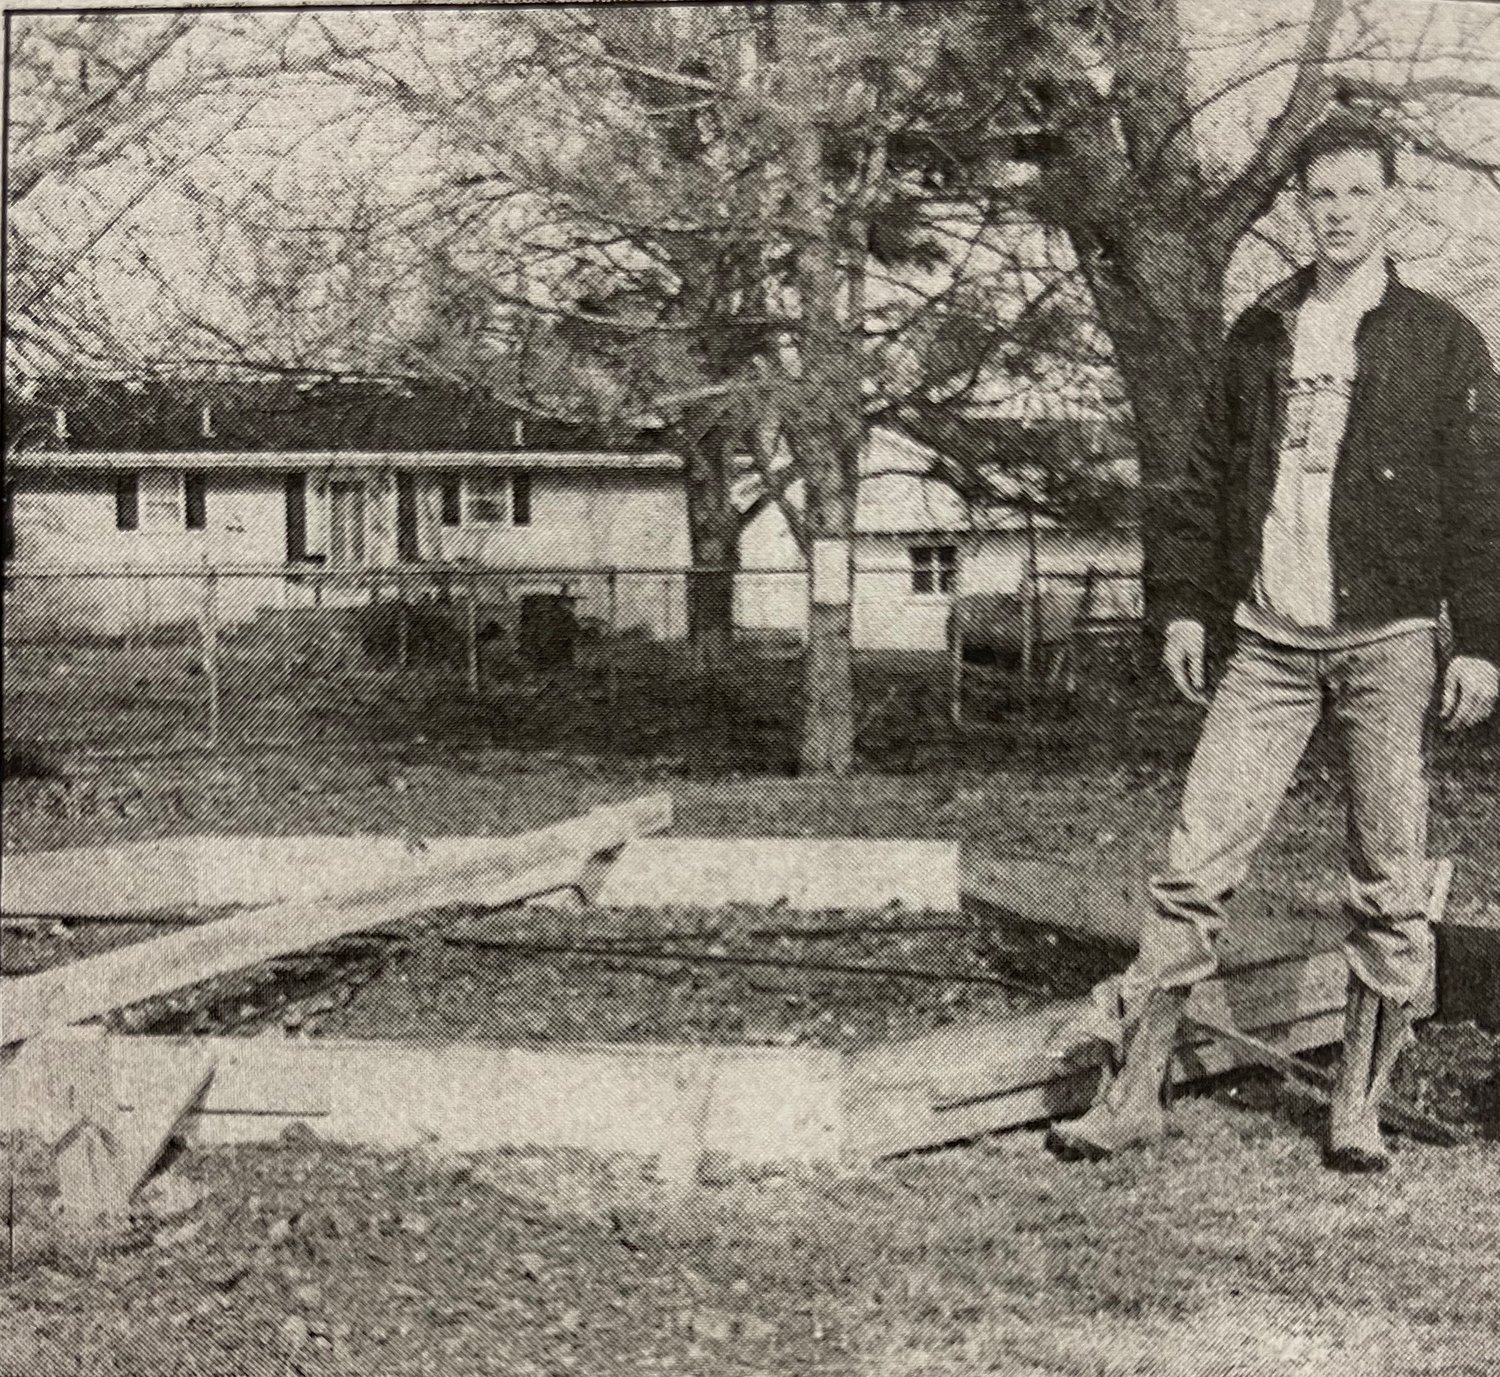 Photo from the Marshfield Mail’s original story on March 19, 1992. “Jim See stands with the framework of his gazebo he is building as part of his Eagle Scout work. The gazebo will be in the park on Clay Street. (Mail photo by Chris Wrinkle).